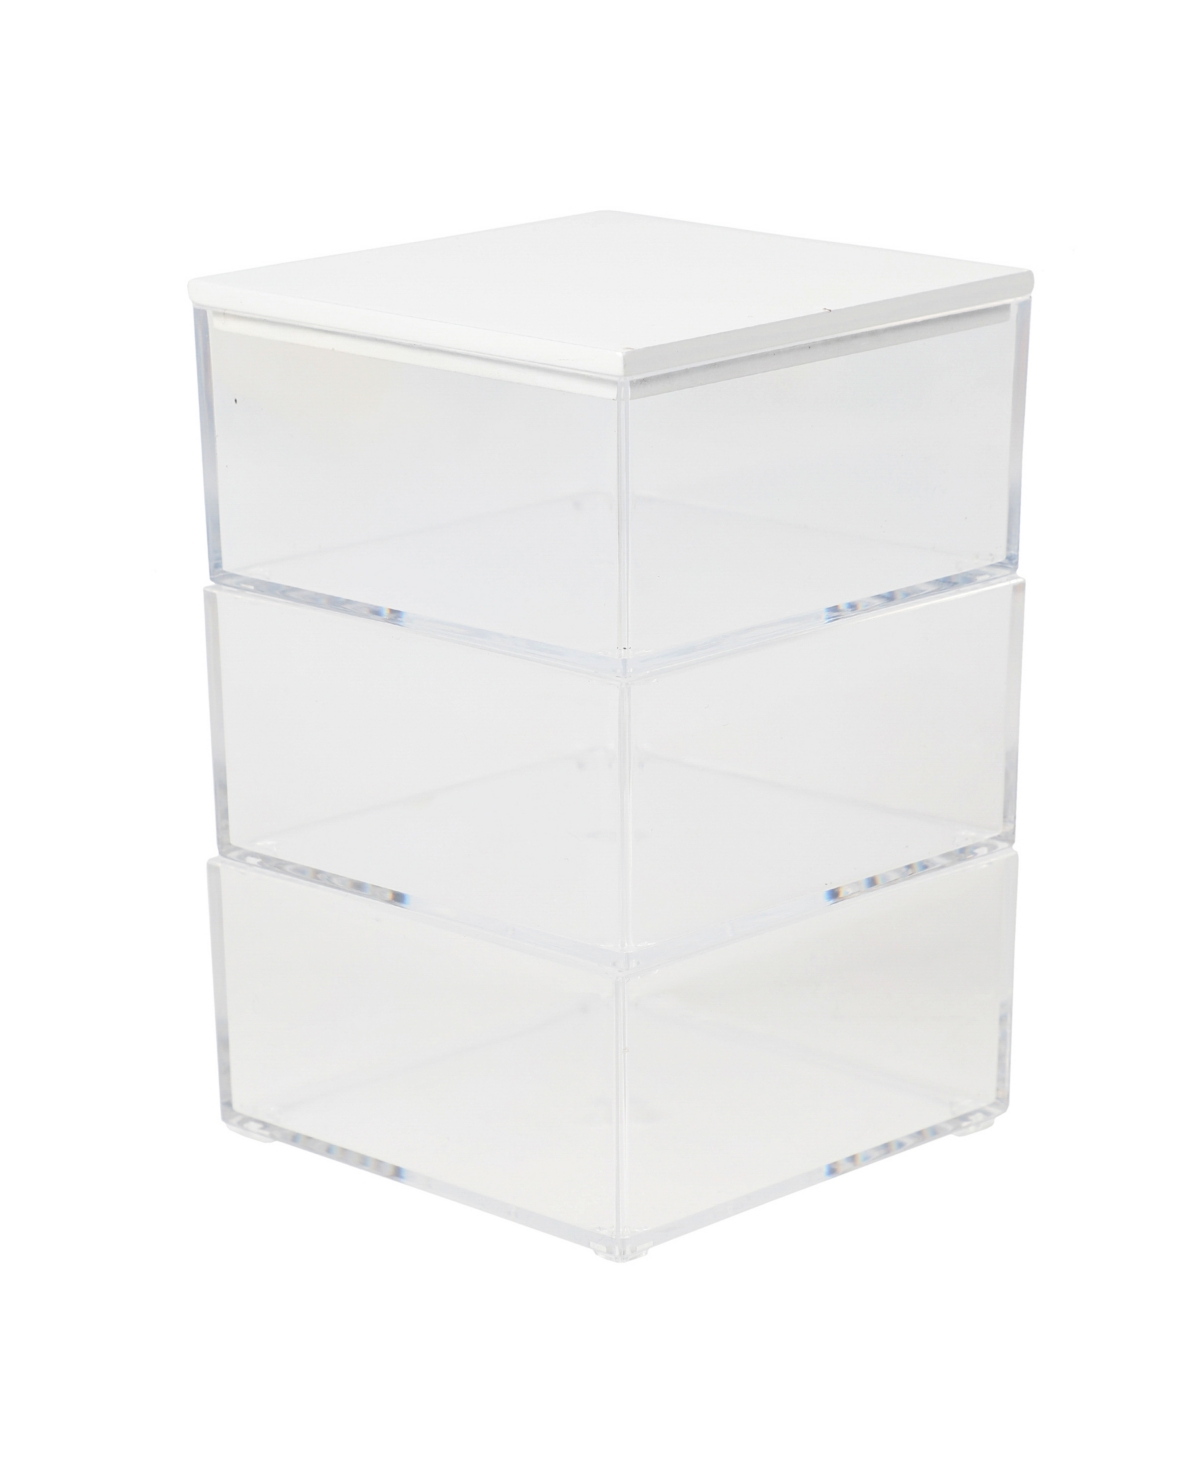 Martha Stewart Brody Plastic Storage Organizer Bins With Engineered Wood Lid For Home Office, Kitchen Or Bathroom, In Clear,white